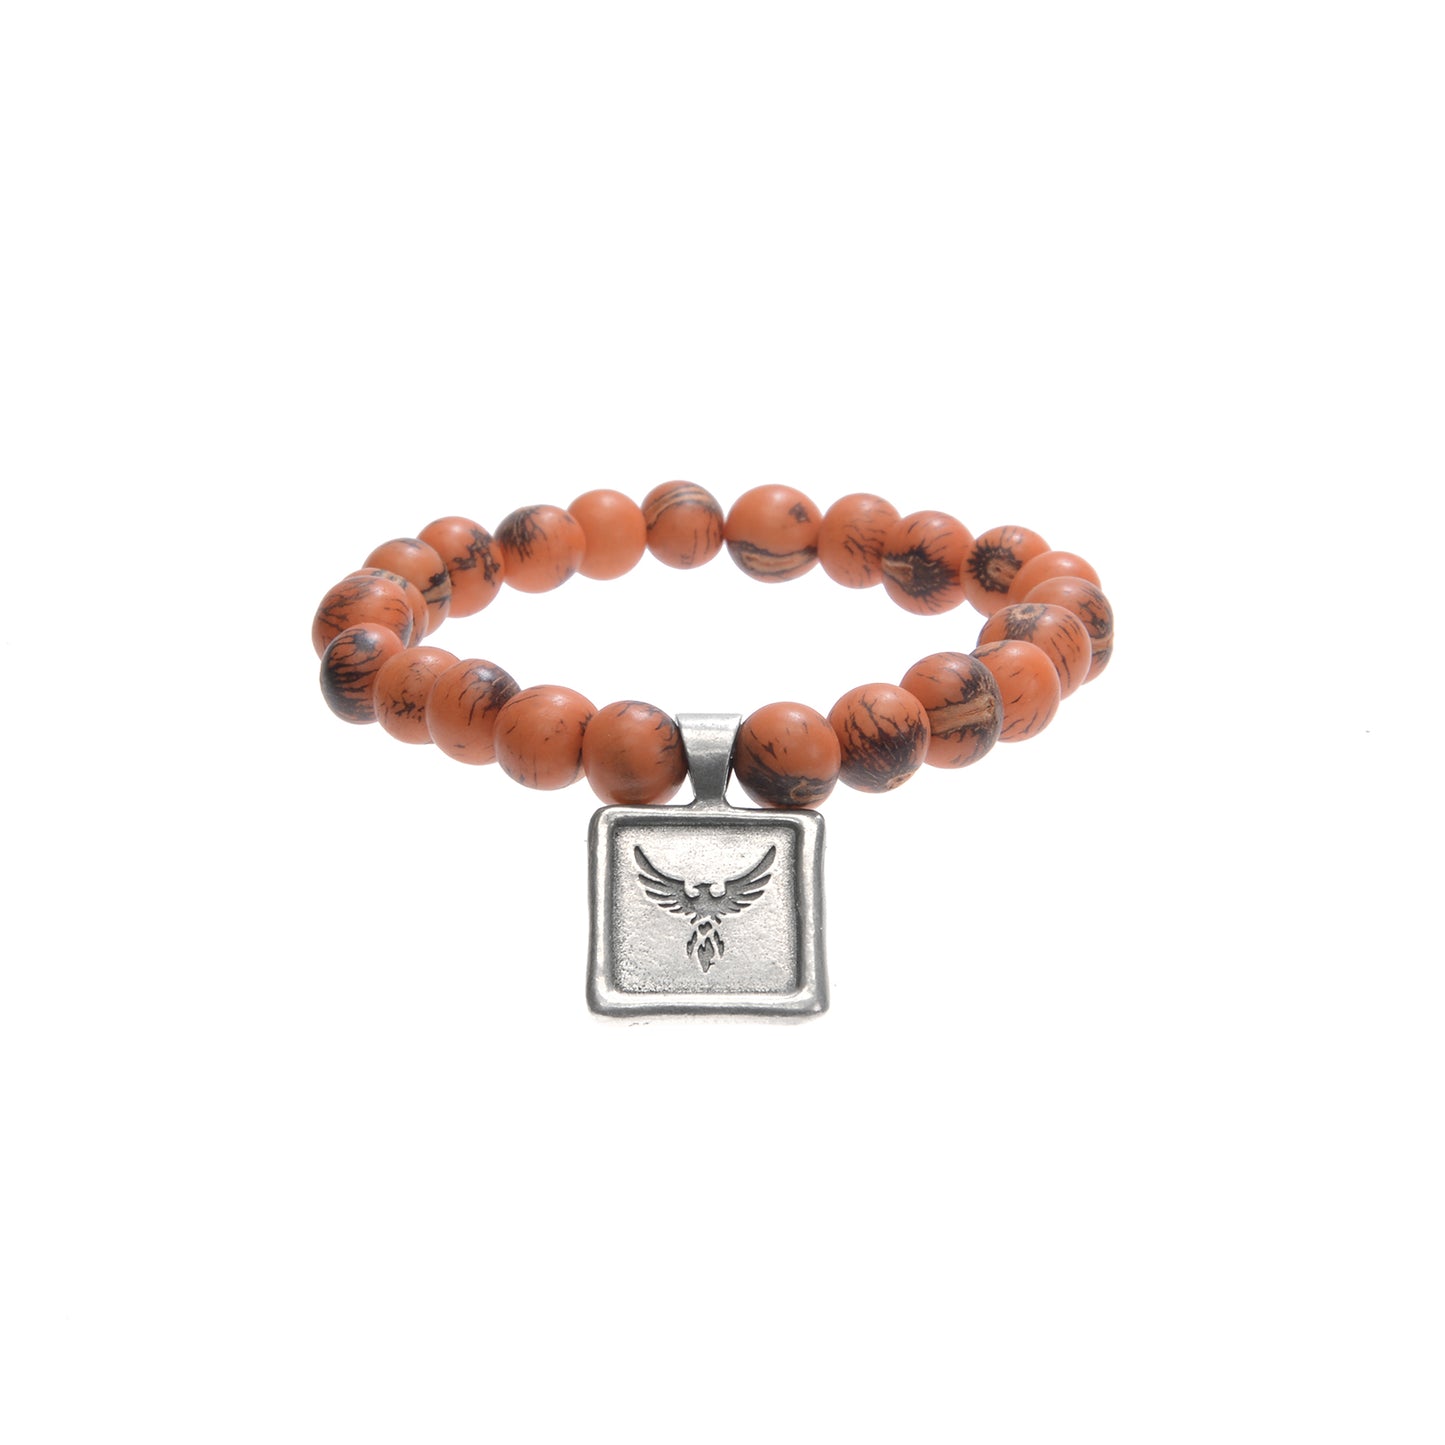 Acai Seeds Of Life Bracelet with Wax Seal - Tiger Tangerine Beads